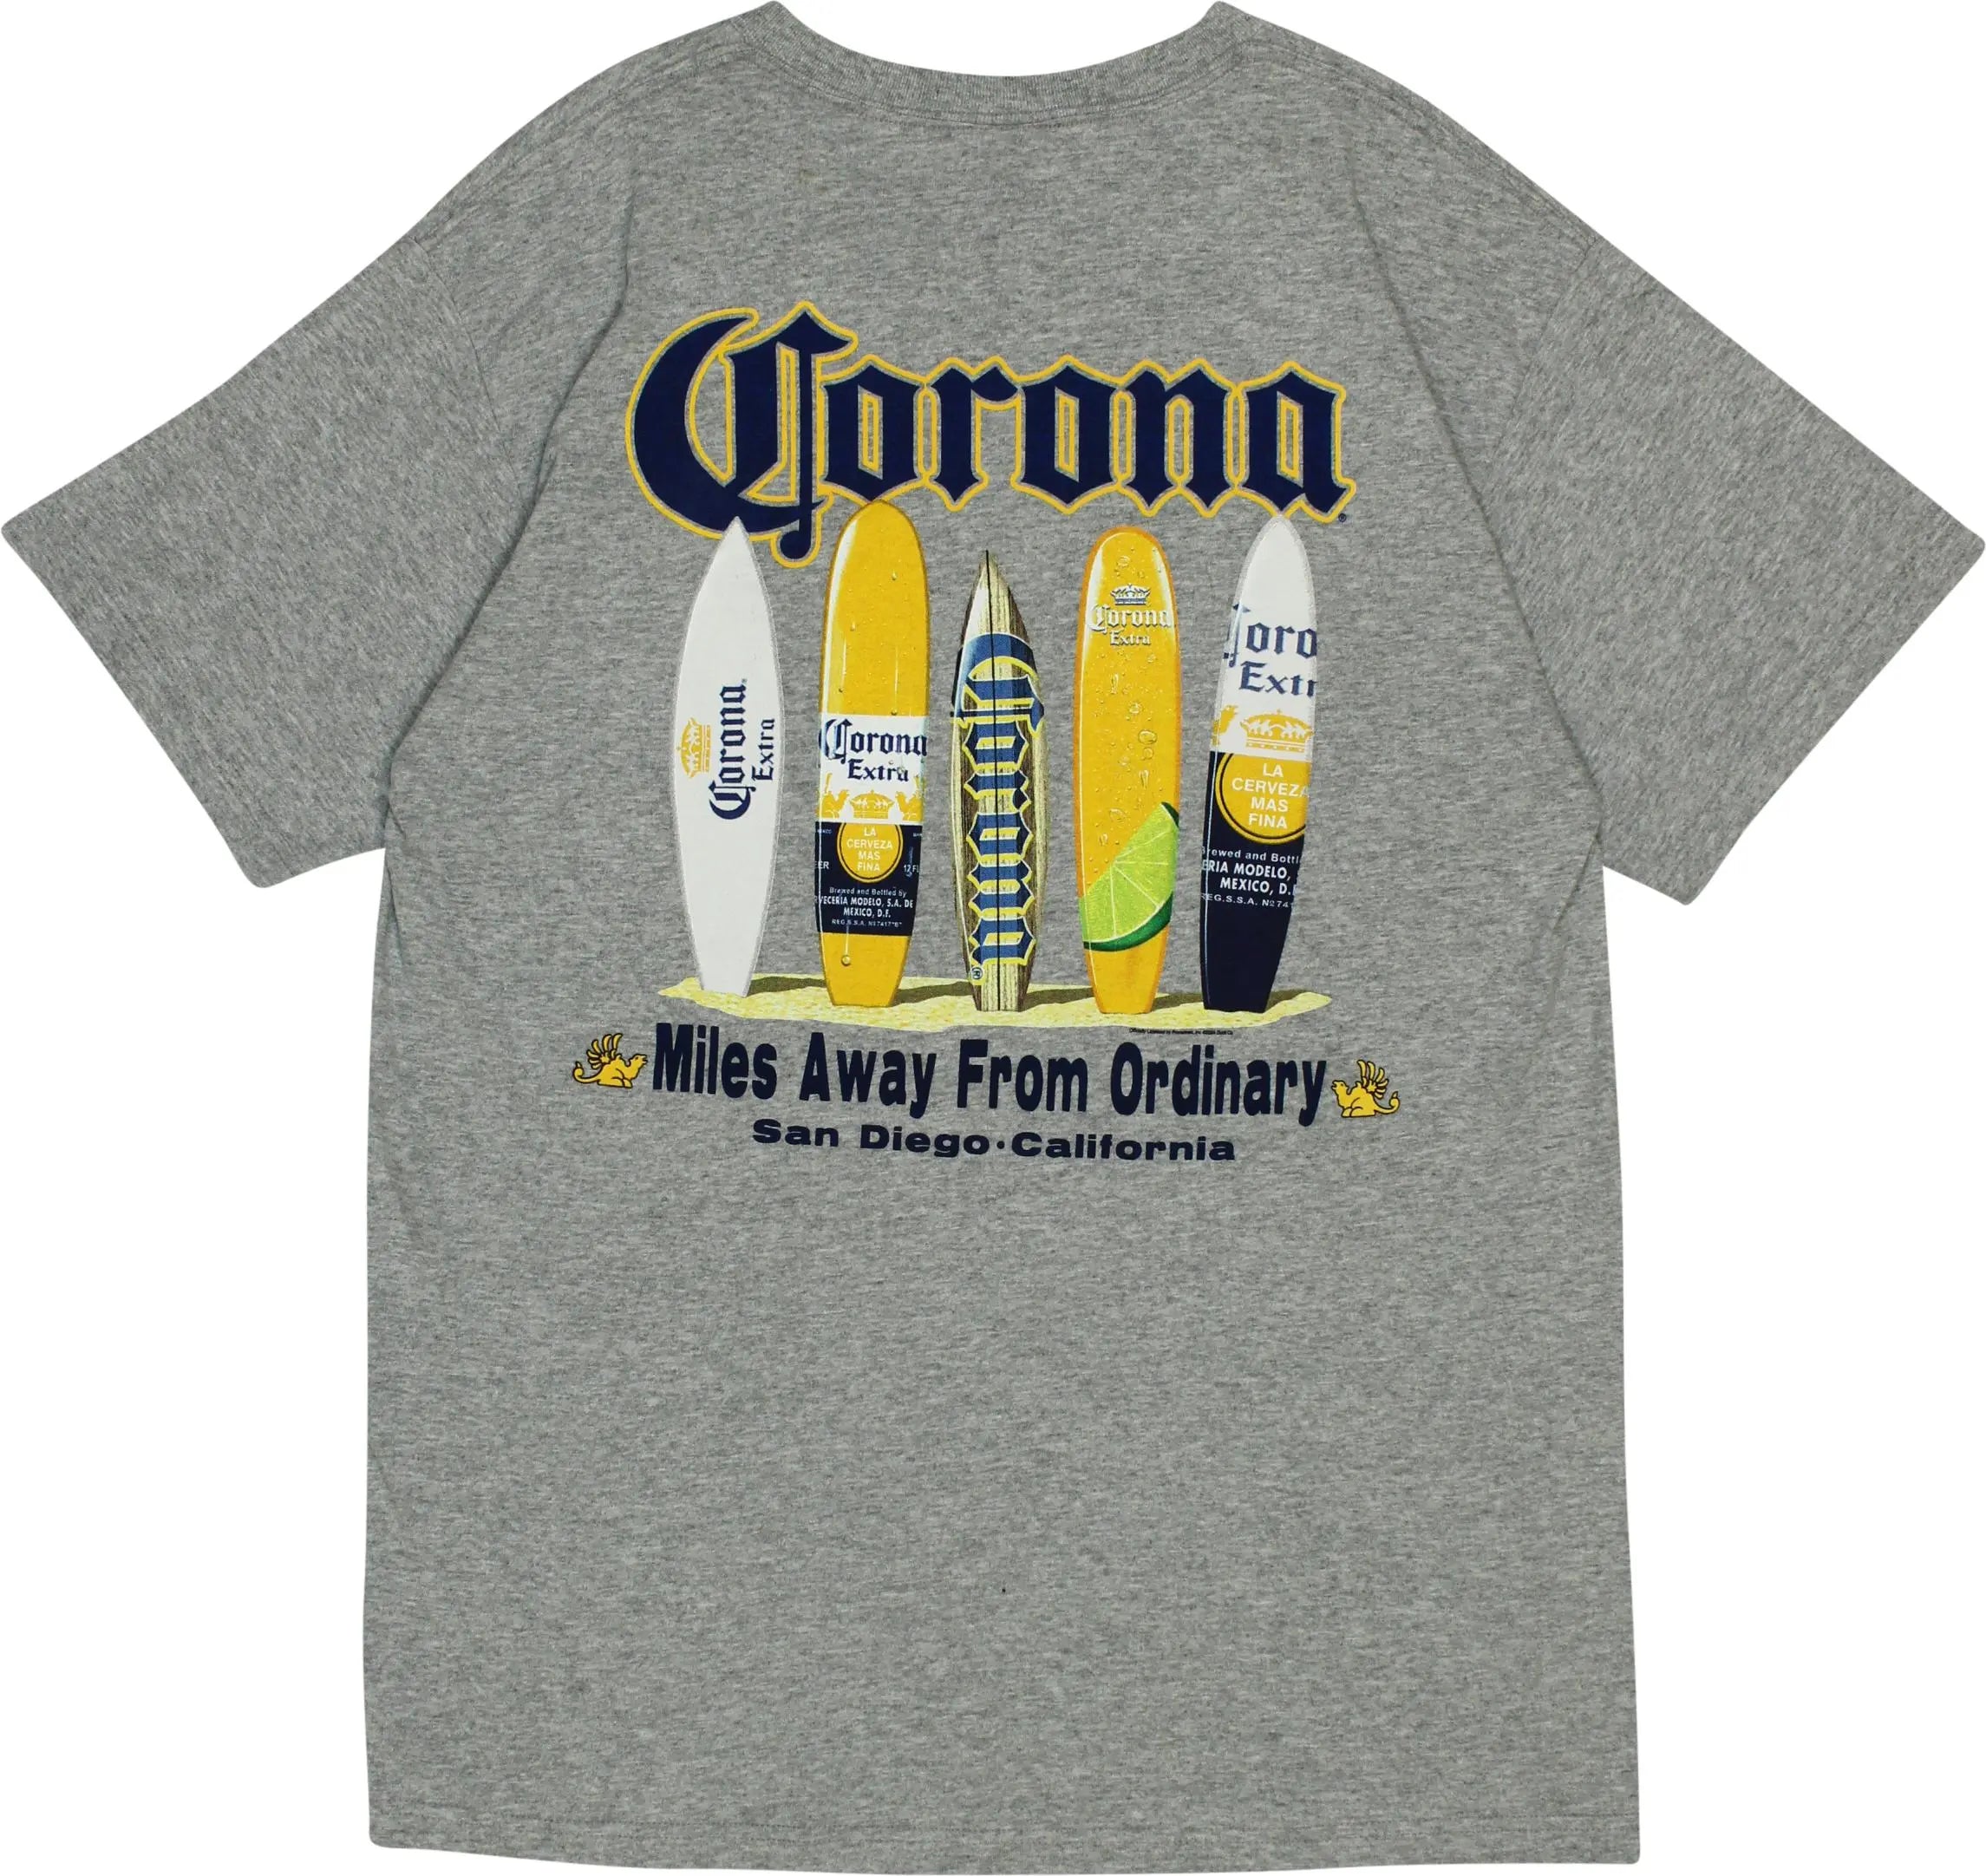 Fruit of the Loom - Corona Merchandise T-Shirt- ThriftTale.com - Vintage and second handclothing